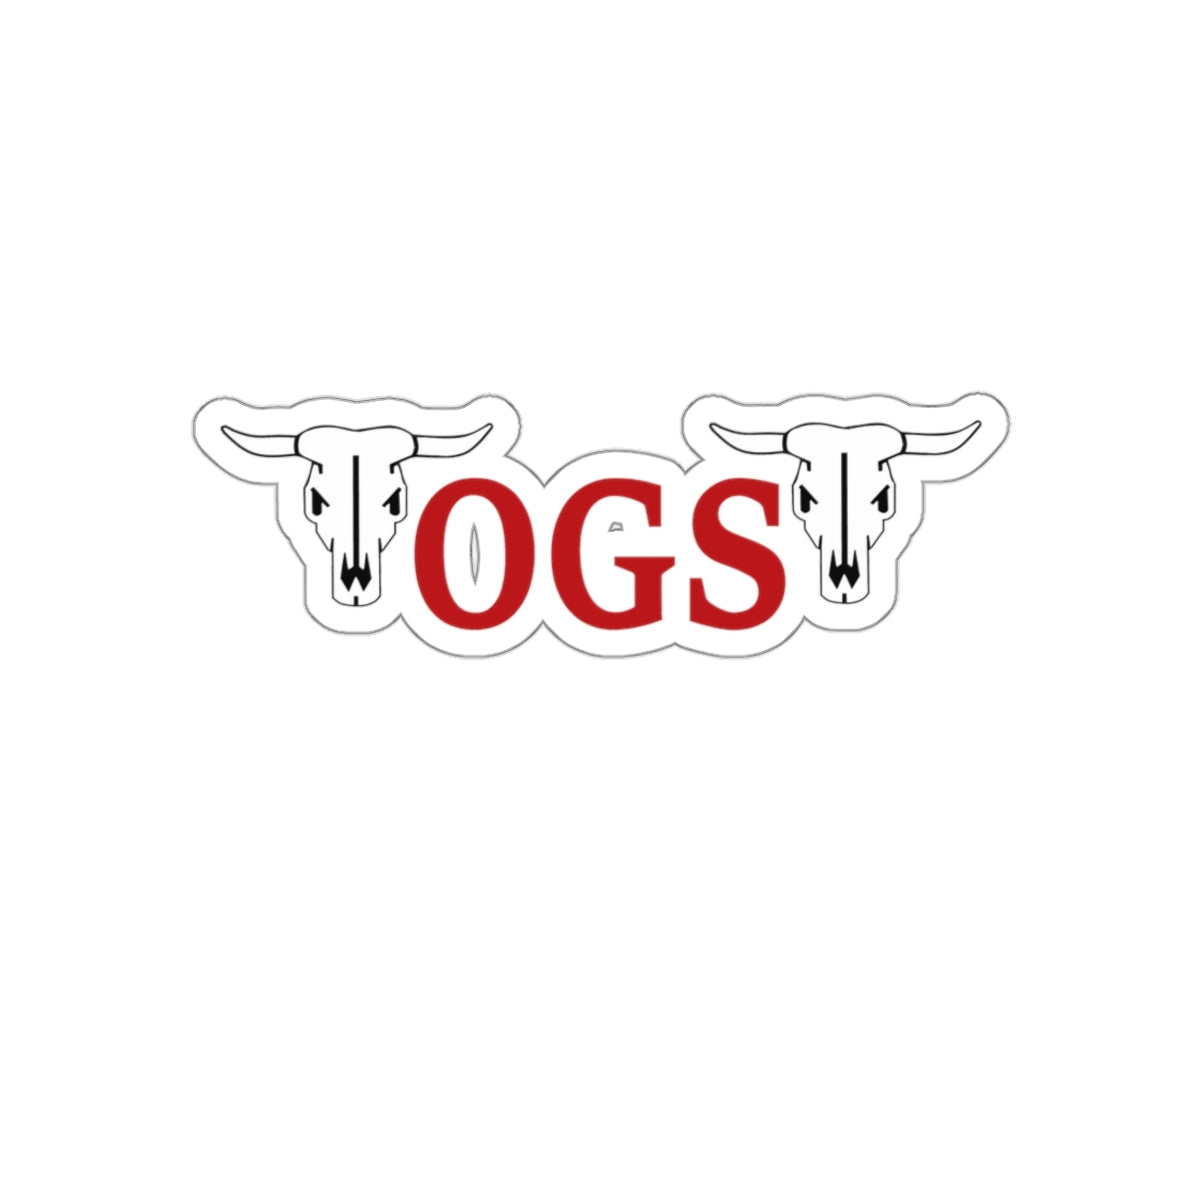 t-ogs STICKERS